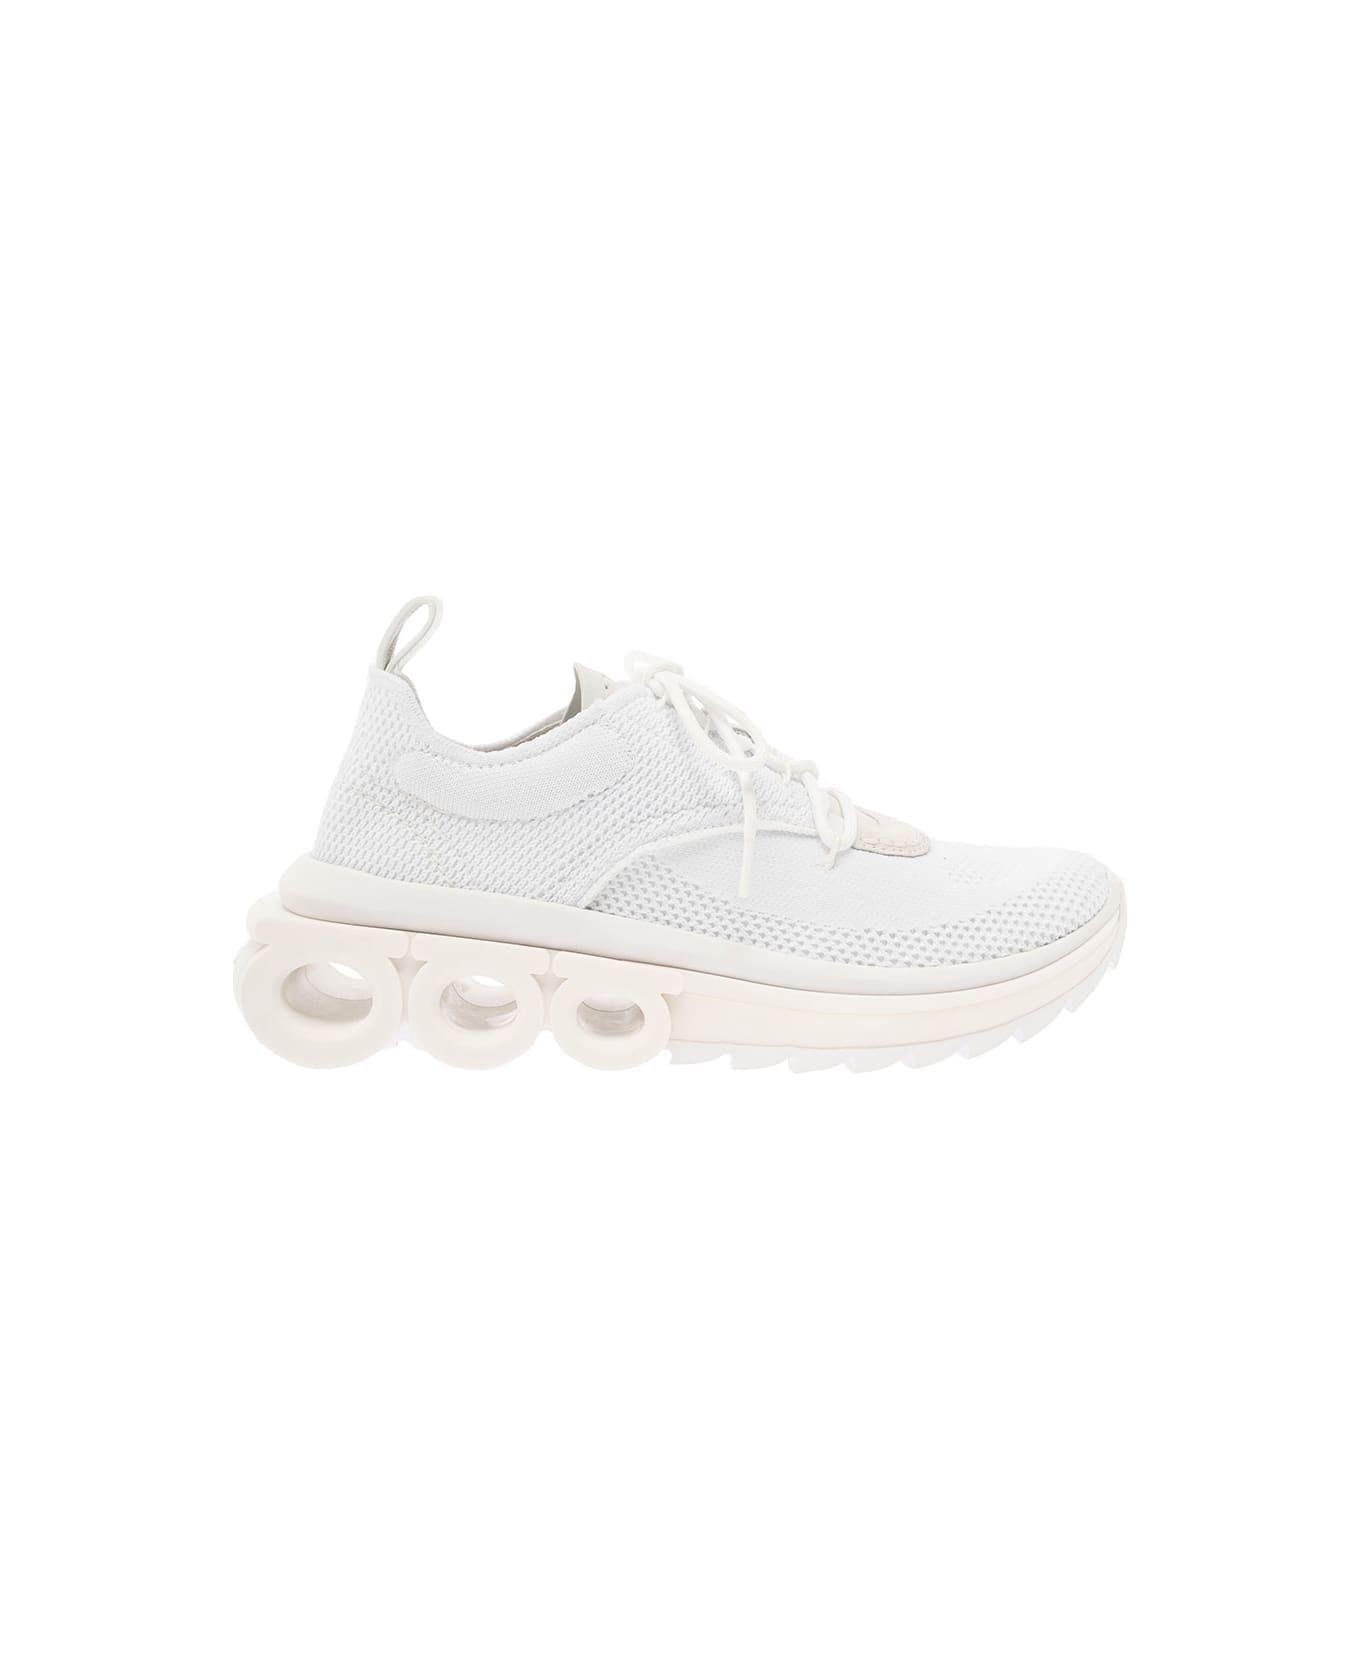 Ferragamo 'nima' White Low Top Sneakers With Gancini Detail In Mixed Materials Woman - White